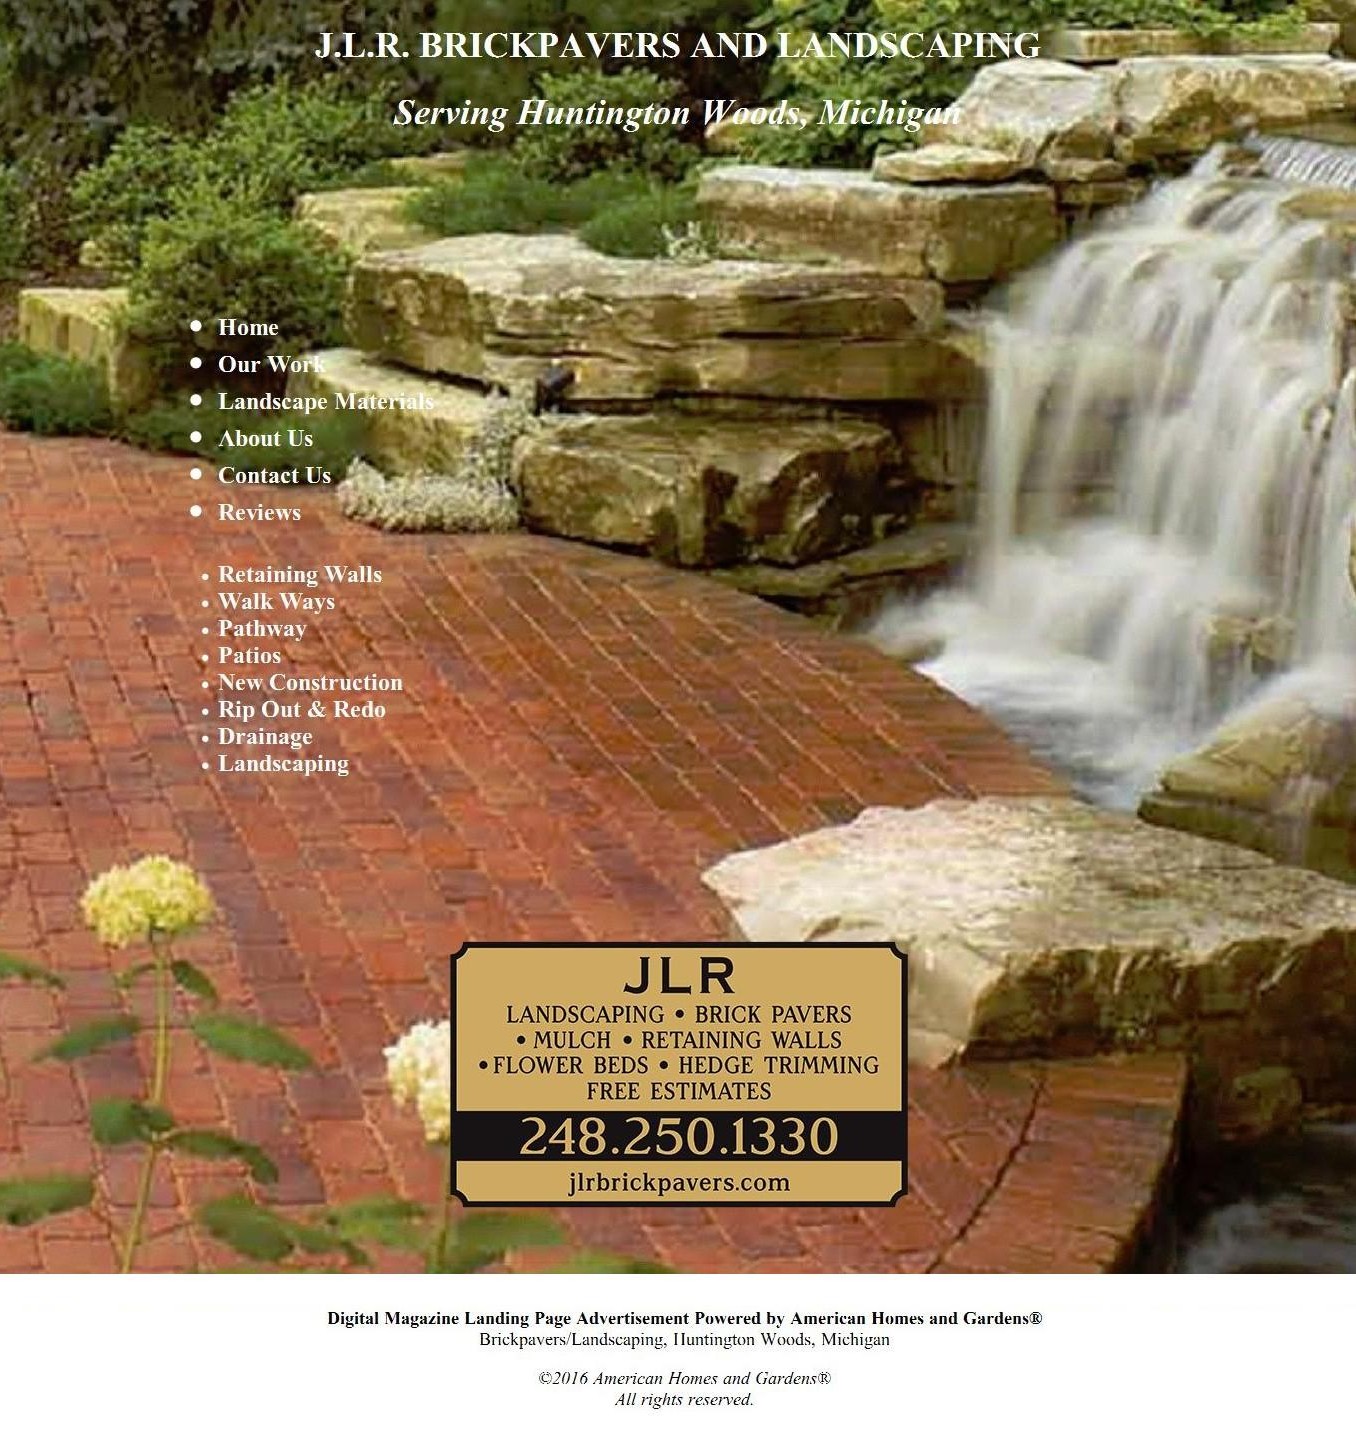 American Homes and Gardens Digital Landing Page Advertisement